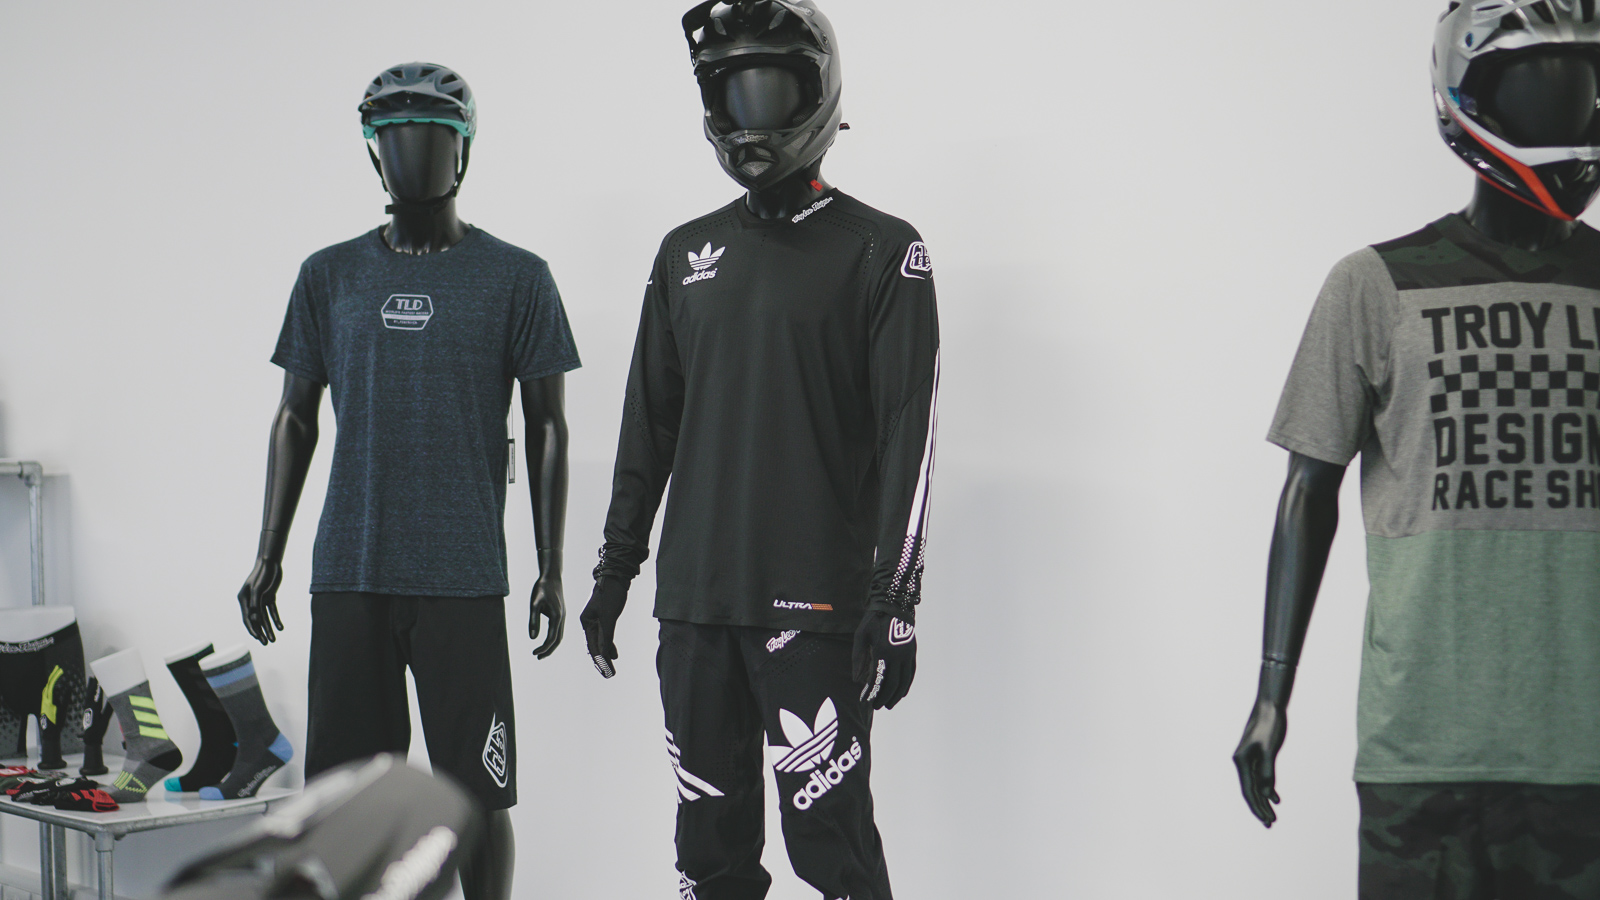 The Troy Lee Designs / Adidas Ultra mountain bike collab is here